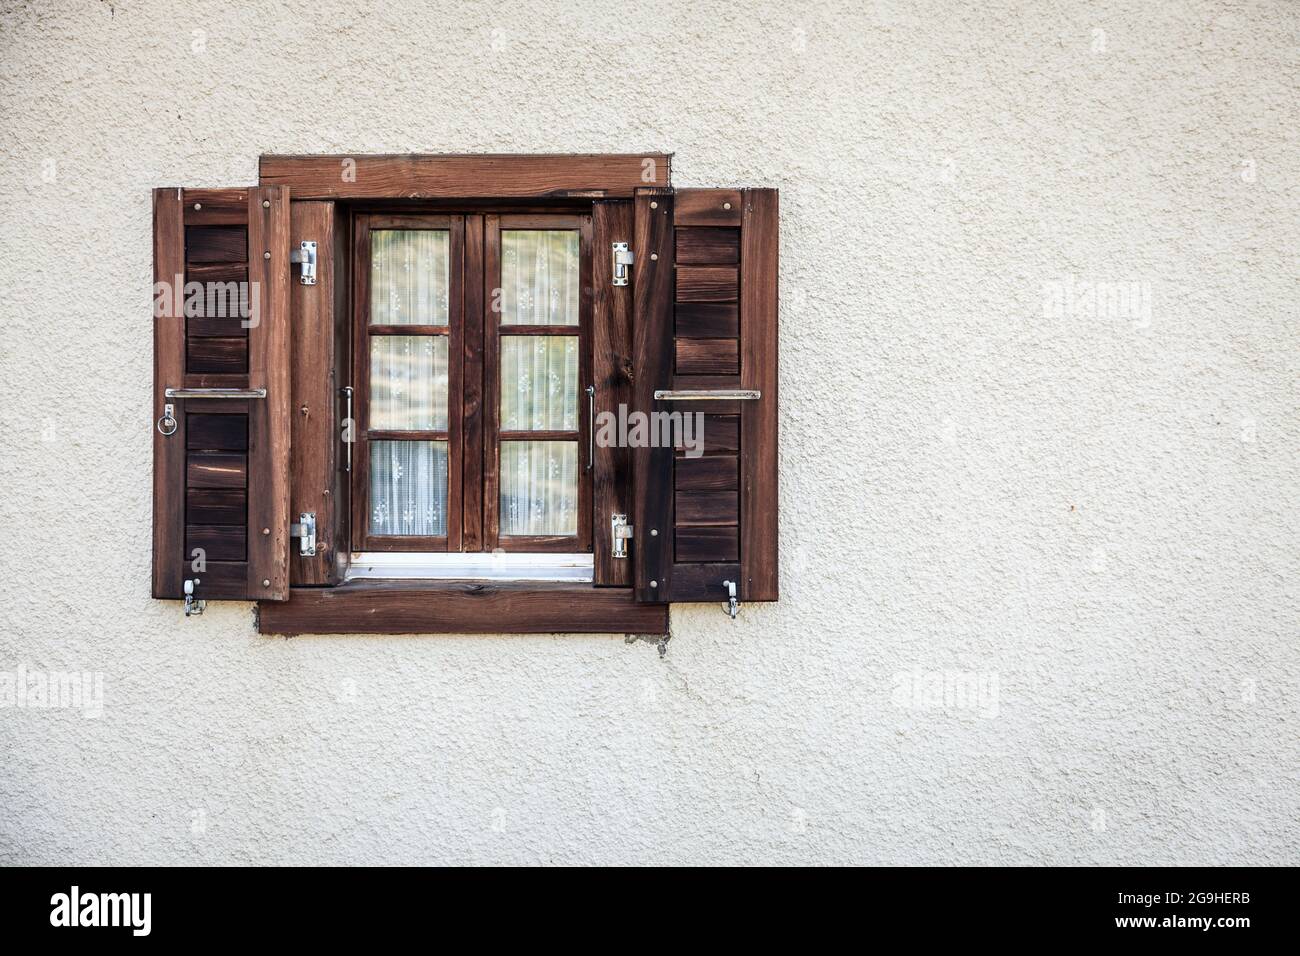 Fragment of a wall of a house in a Swiss alpine village Stock Photo